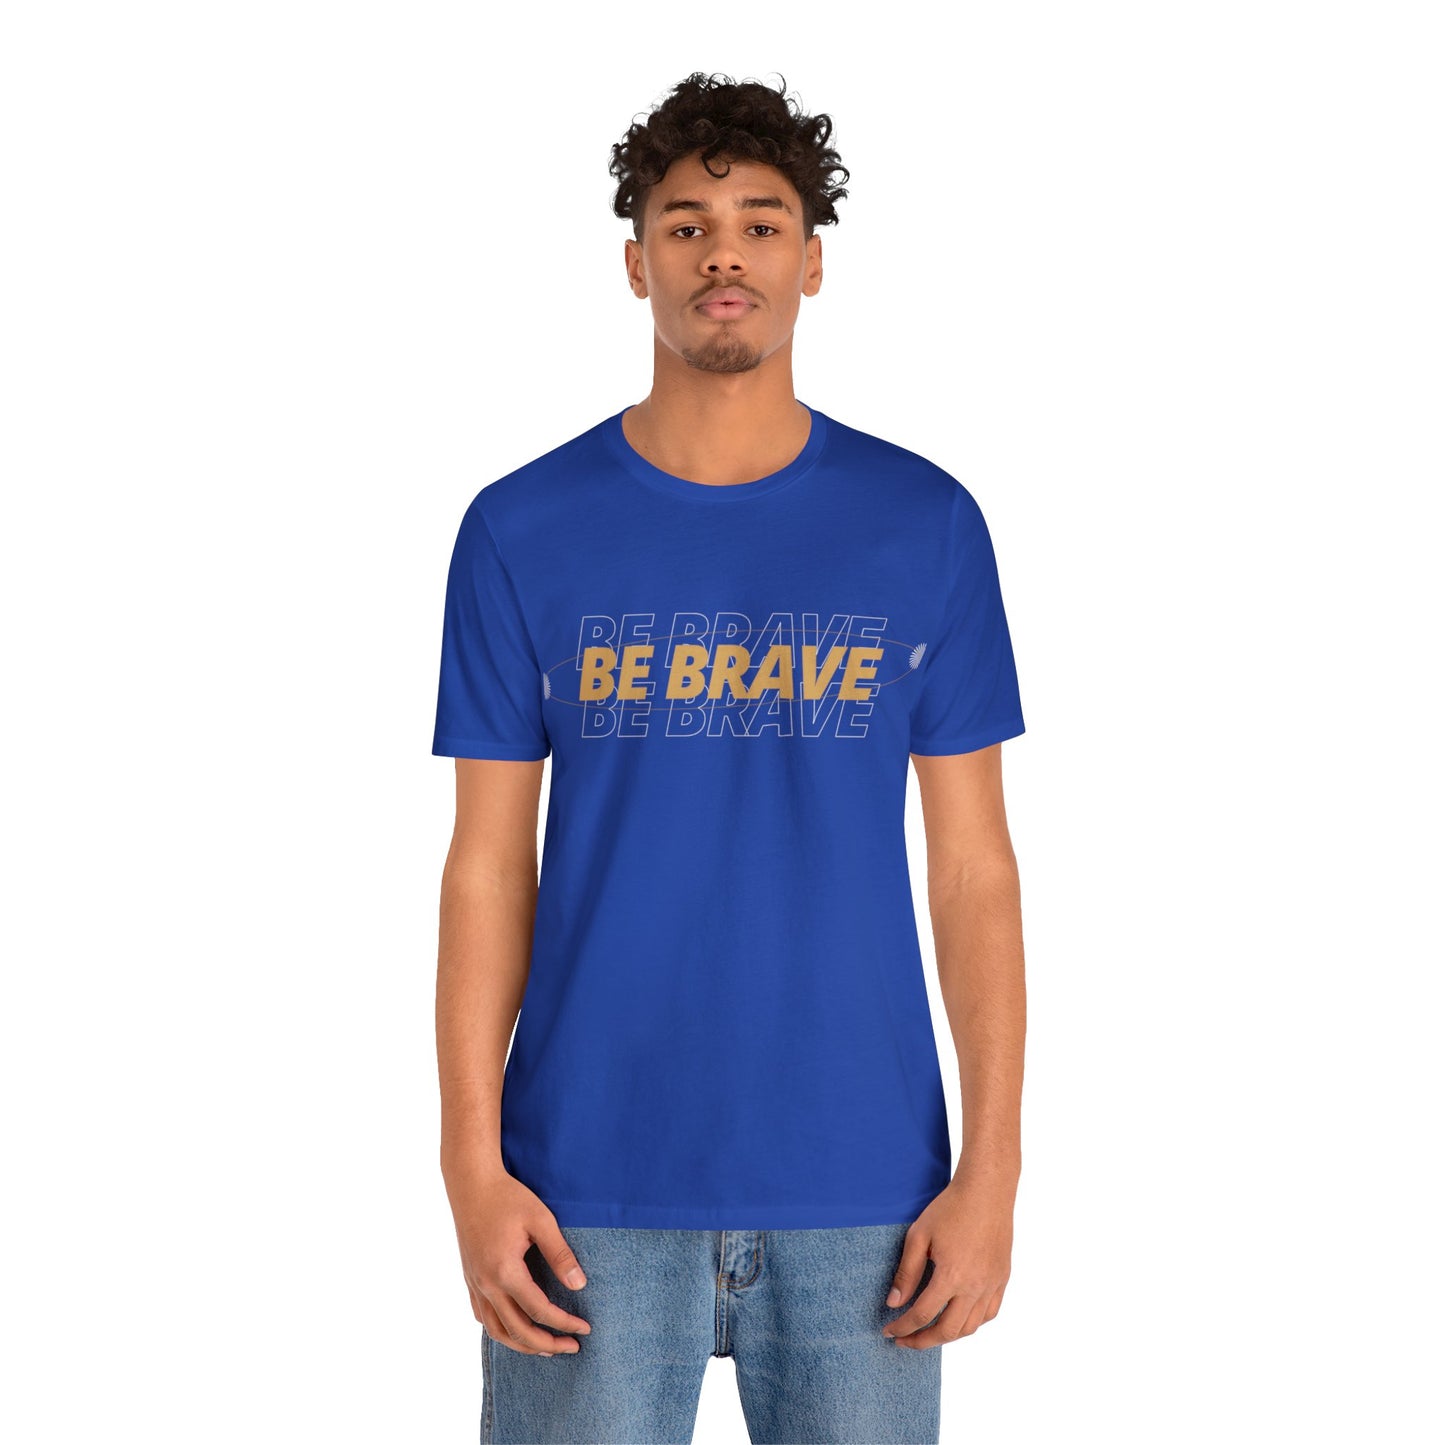 Be Brave Graphic T Shirt for Men and Women